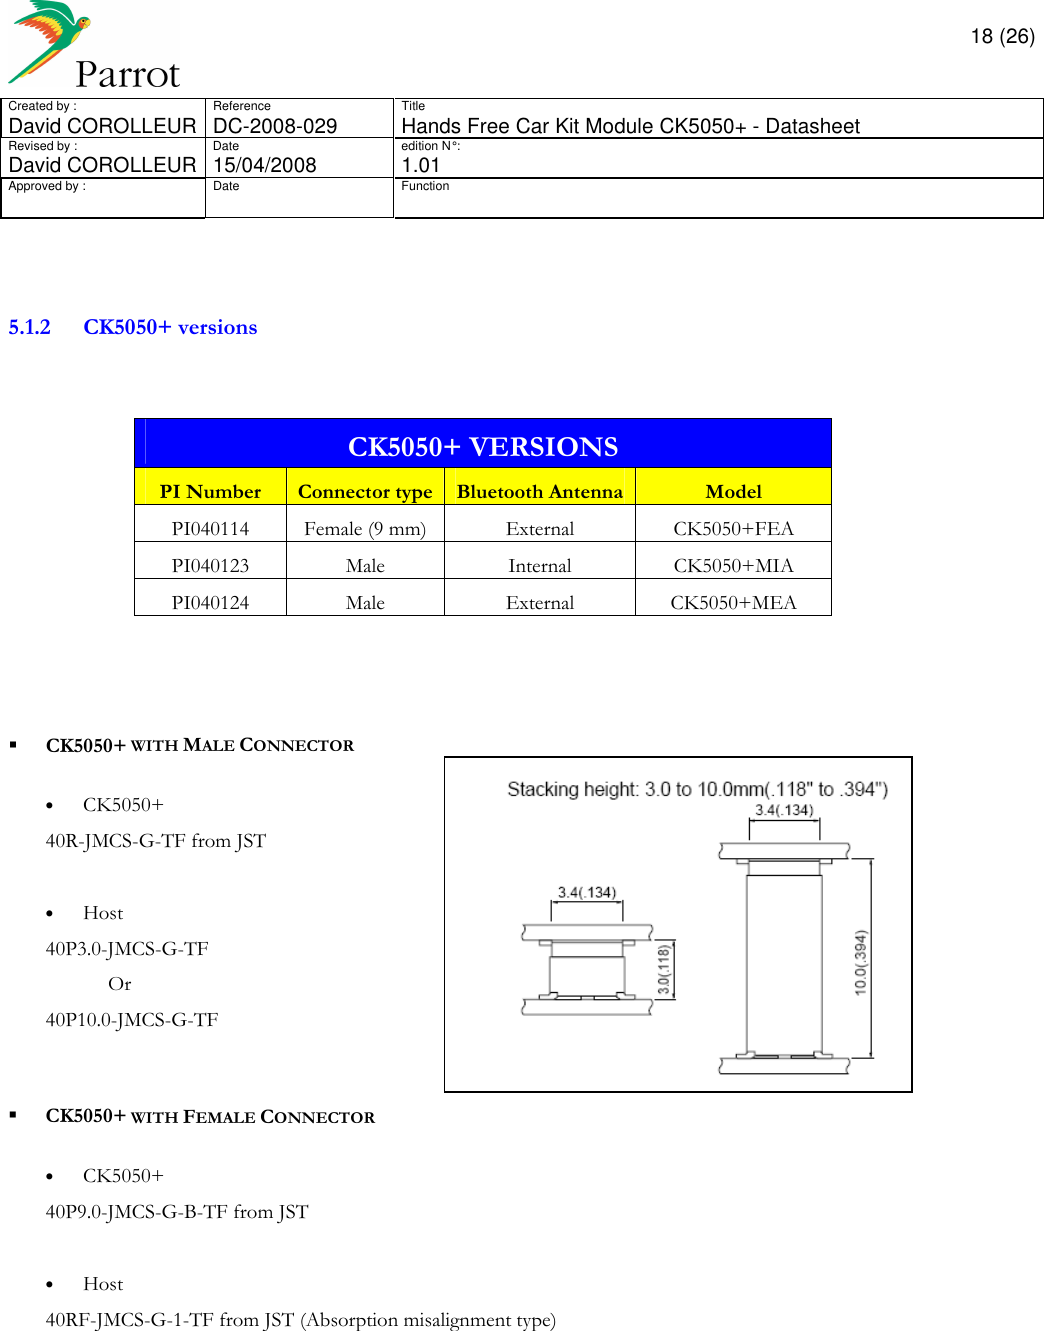       18 (26) Created by :  Reference  Title David COROLLEUR  DC-2008-029  Hands Free Car Kit Module CK5050+ - Datasheet  Revised by :  Date  edition N° :  David COROLLEUR 15/04/2008   1.01 Approved by :  Date  Function                   5.1.2 CK5050+ versions     CK5050+ VERSIONS  PI Number  Connector type Bluetooth Antenna Model PI040114  Female (9 mm)  External  CK5050+FEA PI040123  Male  Internal  CK5050+MIA PI040124  Male  External  CK5050+MEA       CK5050+ WITH MALE CONNECTOR  • CK5050+ 40R-JMCS-G-TF from JST  • Host 40P3.0-JMCS-G-TF        Or 40P10.0-JMCS-G-TF    CK5050+ WITH FEMALE CONNECTOR  • CK5050+ 40P9.0-JMCS-G-B-TF from JST  • Host 40RF-JMCS-G-1-TF from JST (Absorption misalignment type)   